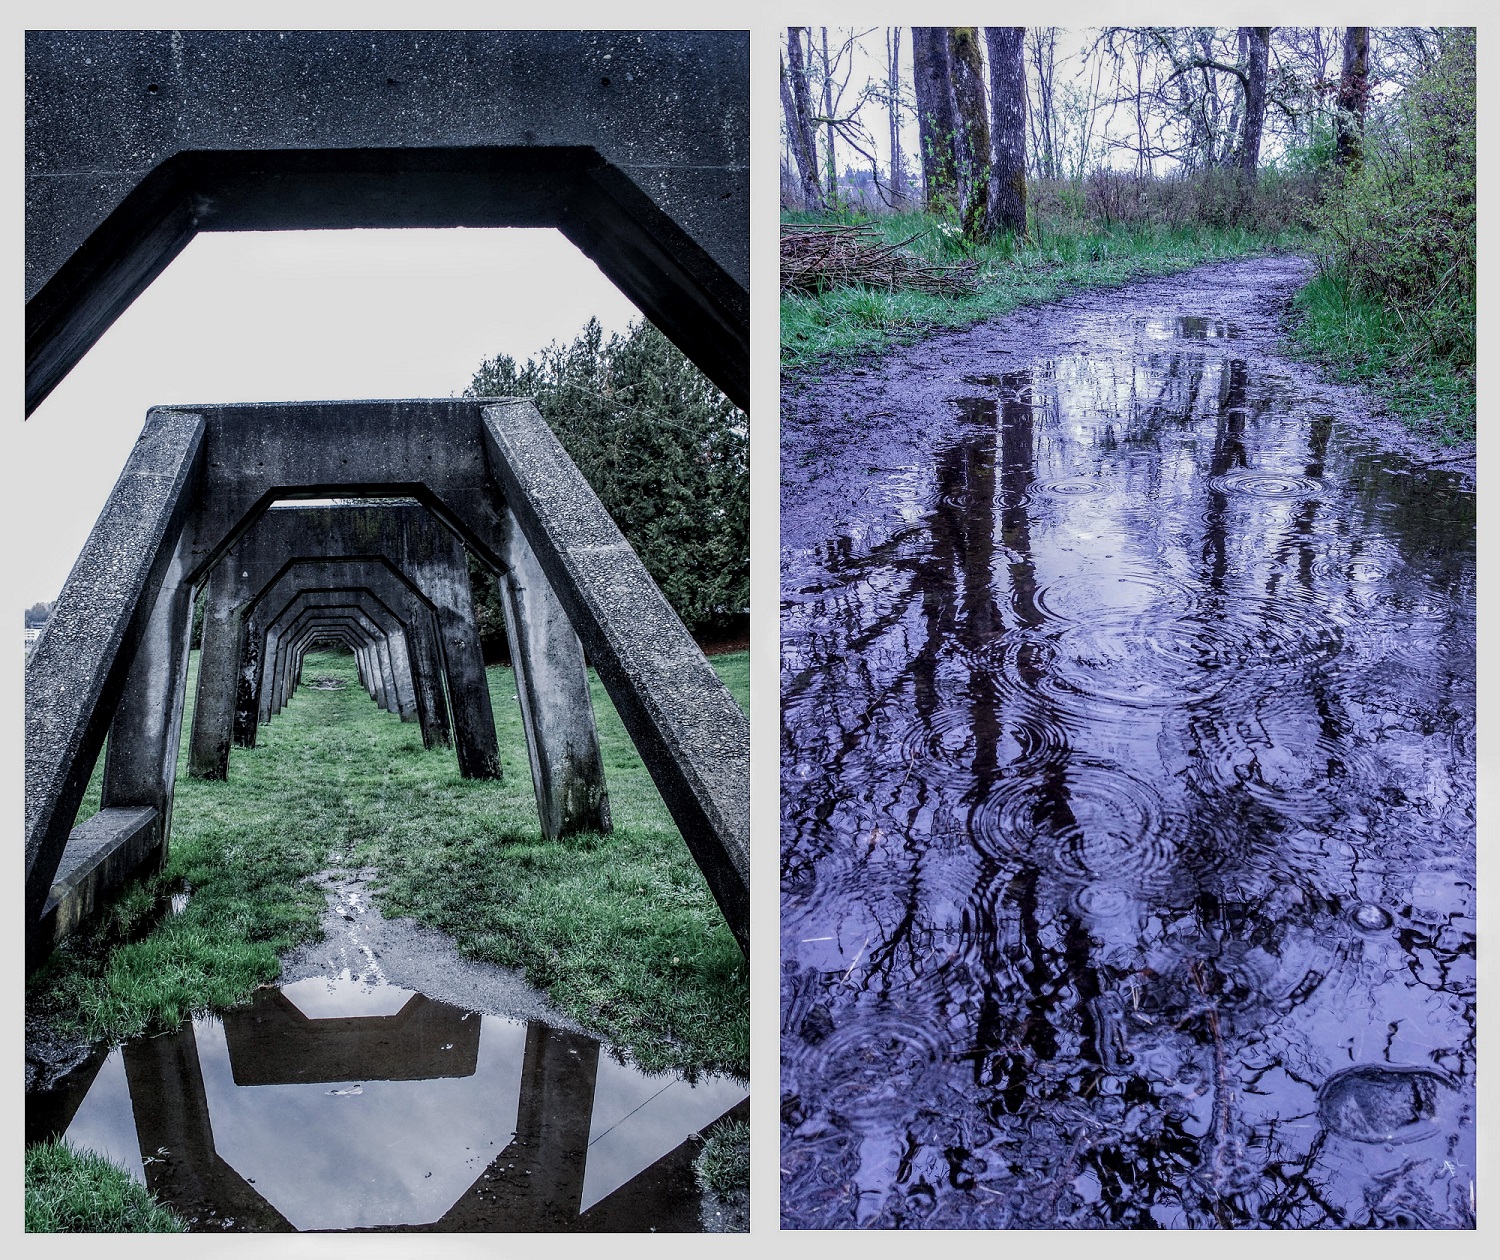 An image of concrete archways reflected in a pool of water amid a grass field, is juxtaposed against an image of a shallow waterway in a forest, reflecting the trees surrounding on either side.